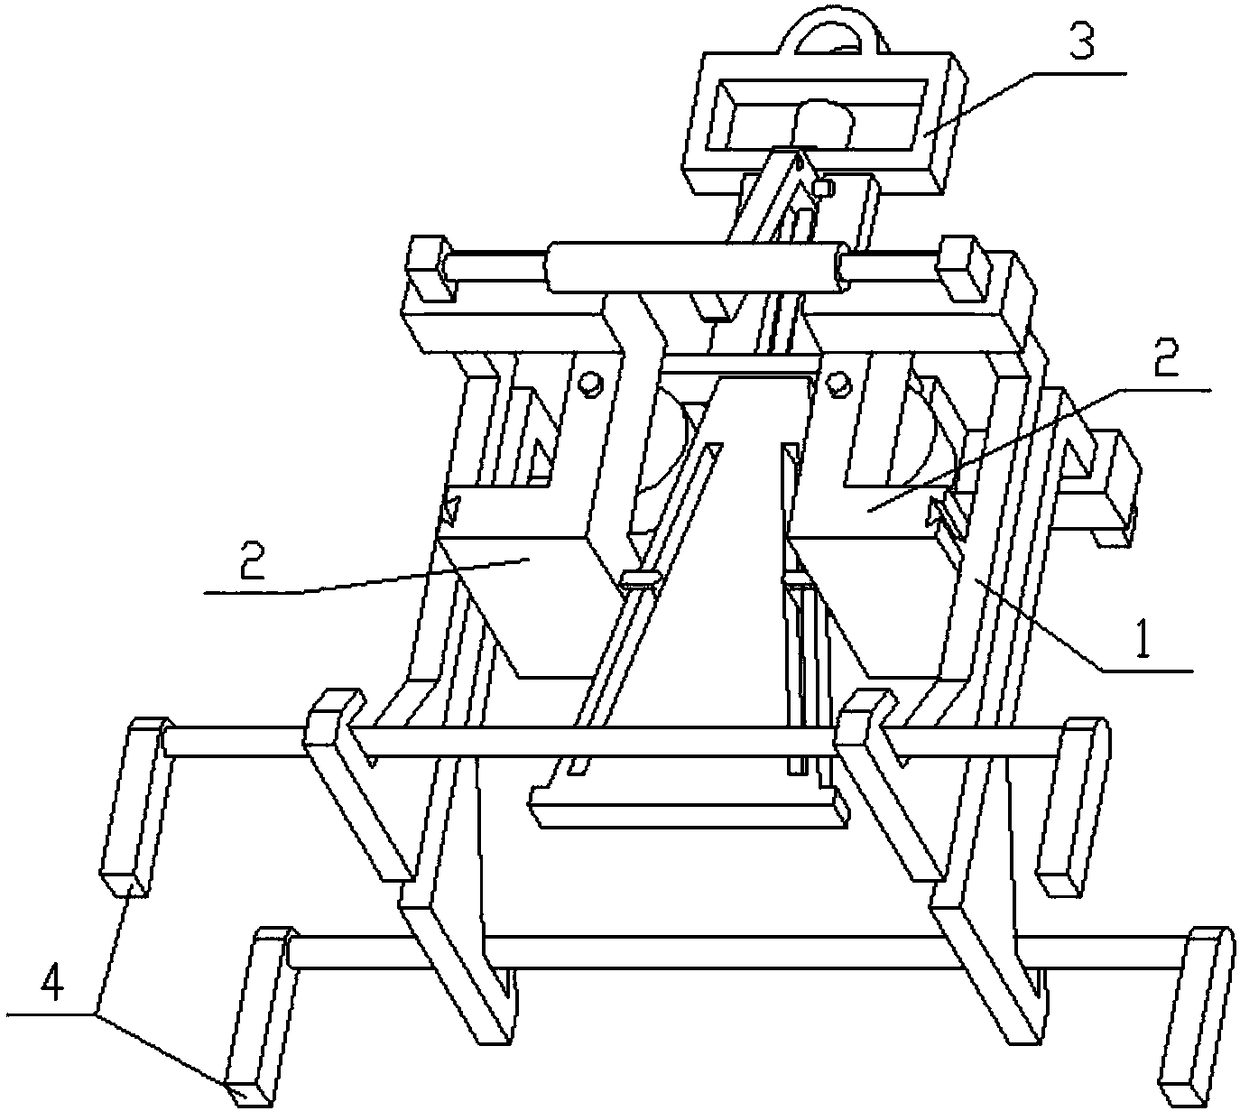 Folding industrial container hoisting device